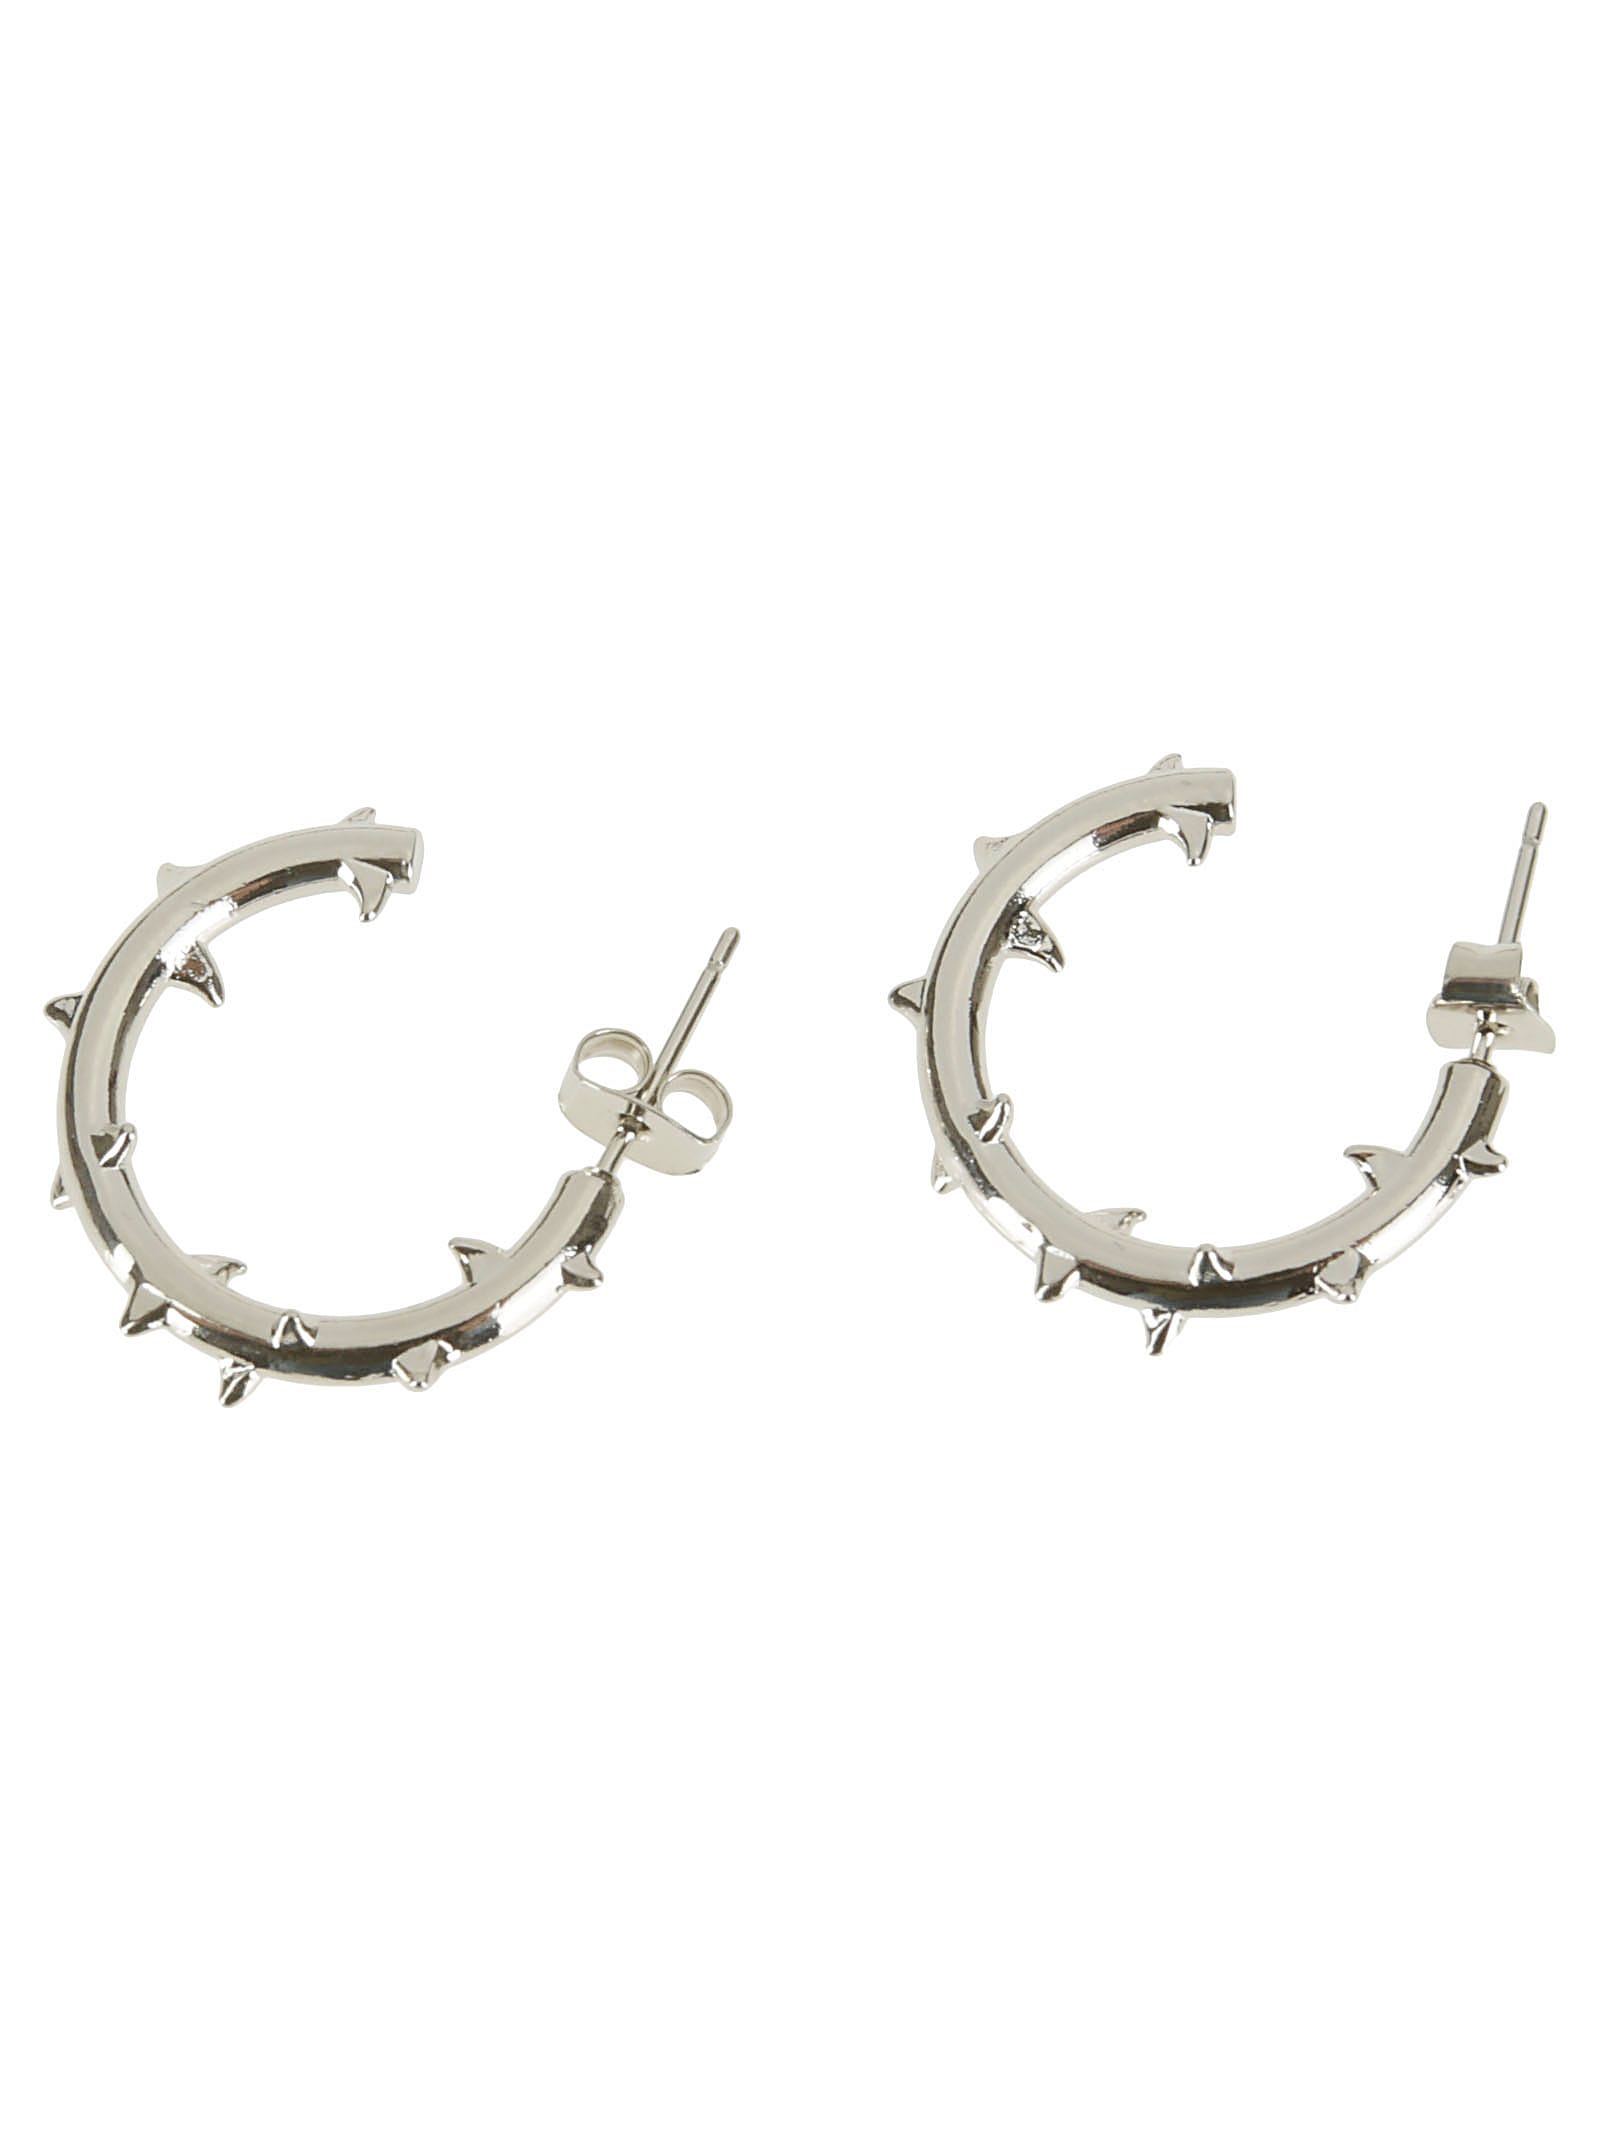 Justine Clenquet Hirschy Earrings In Palladium